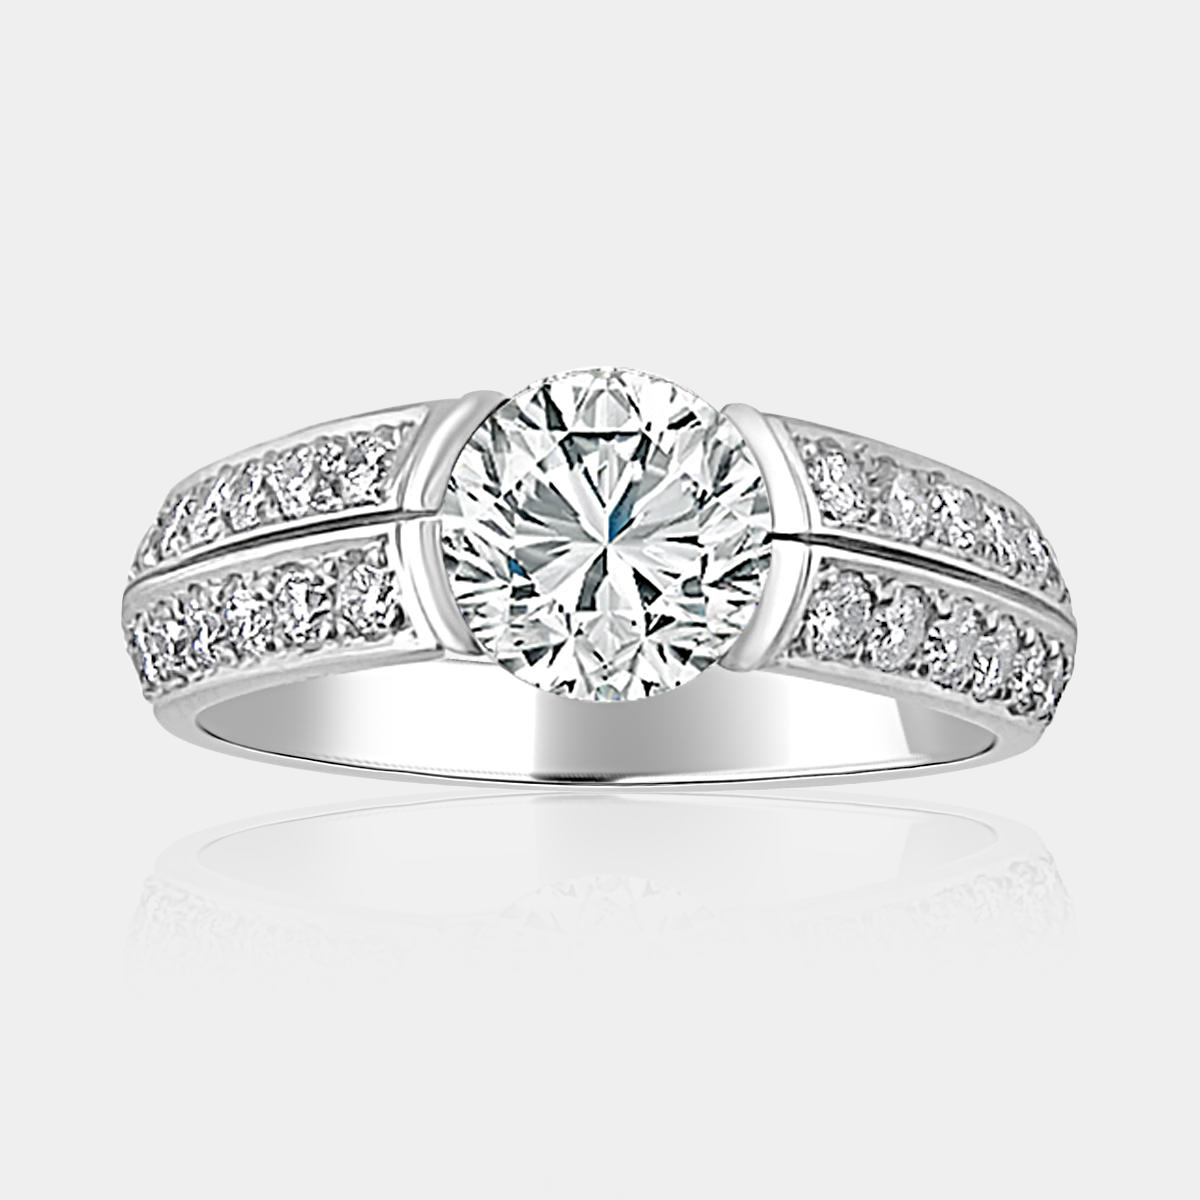 1.60 carat Round brilliant cut diamond ring with 2 rows of shoulder diamonds.